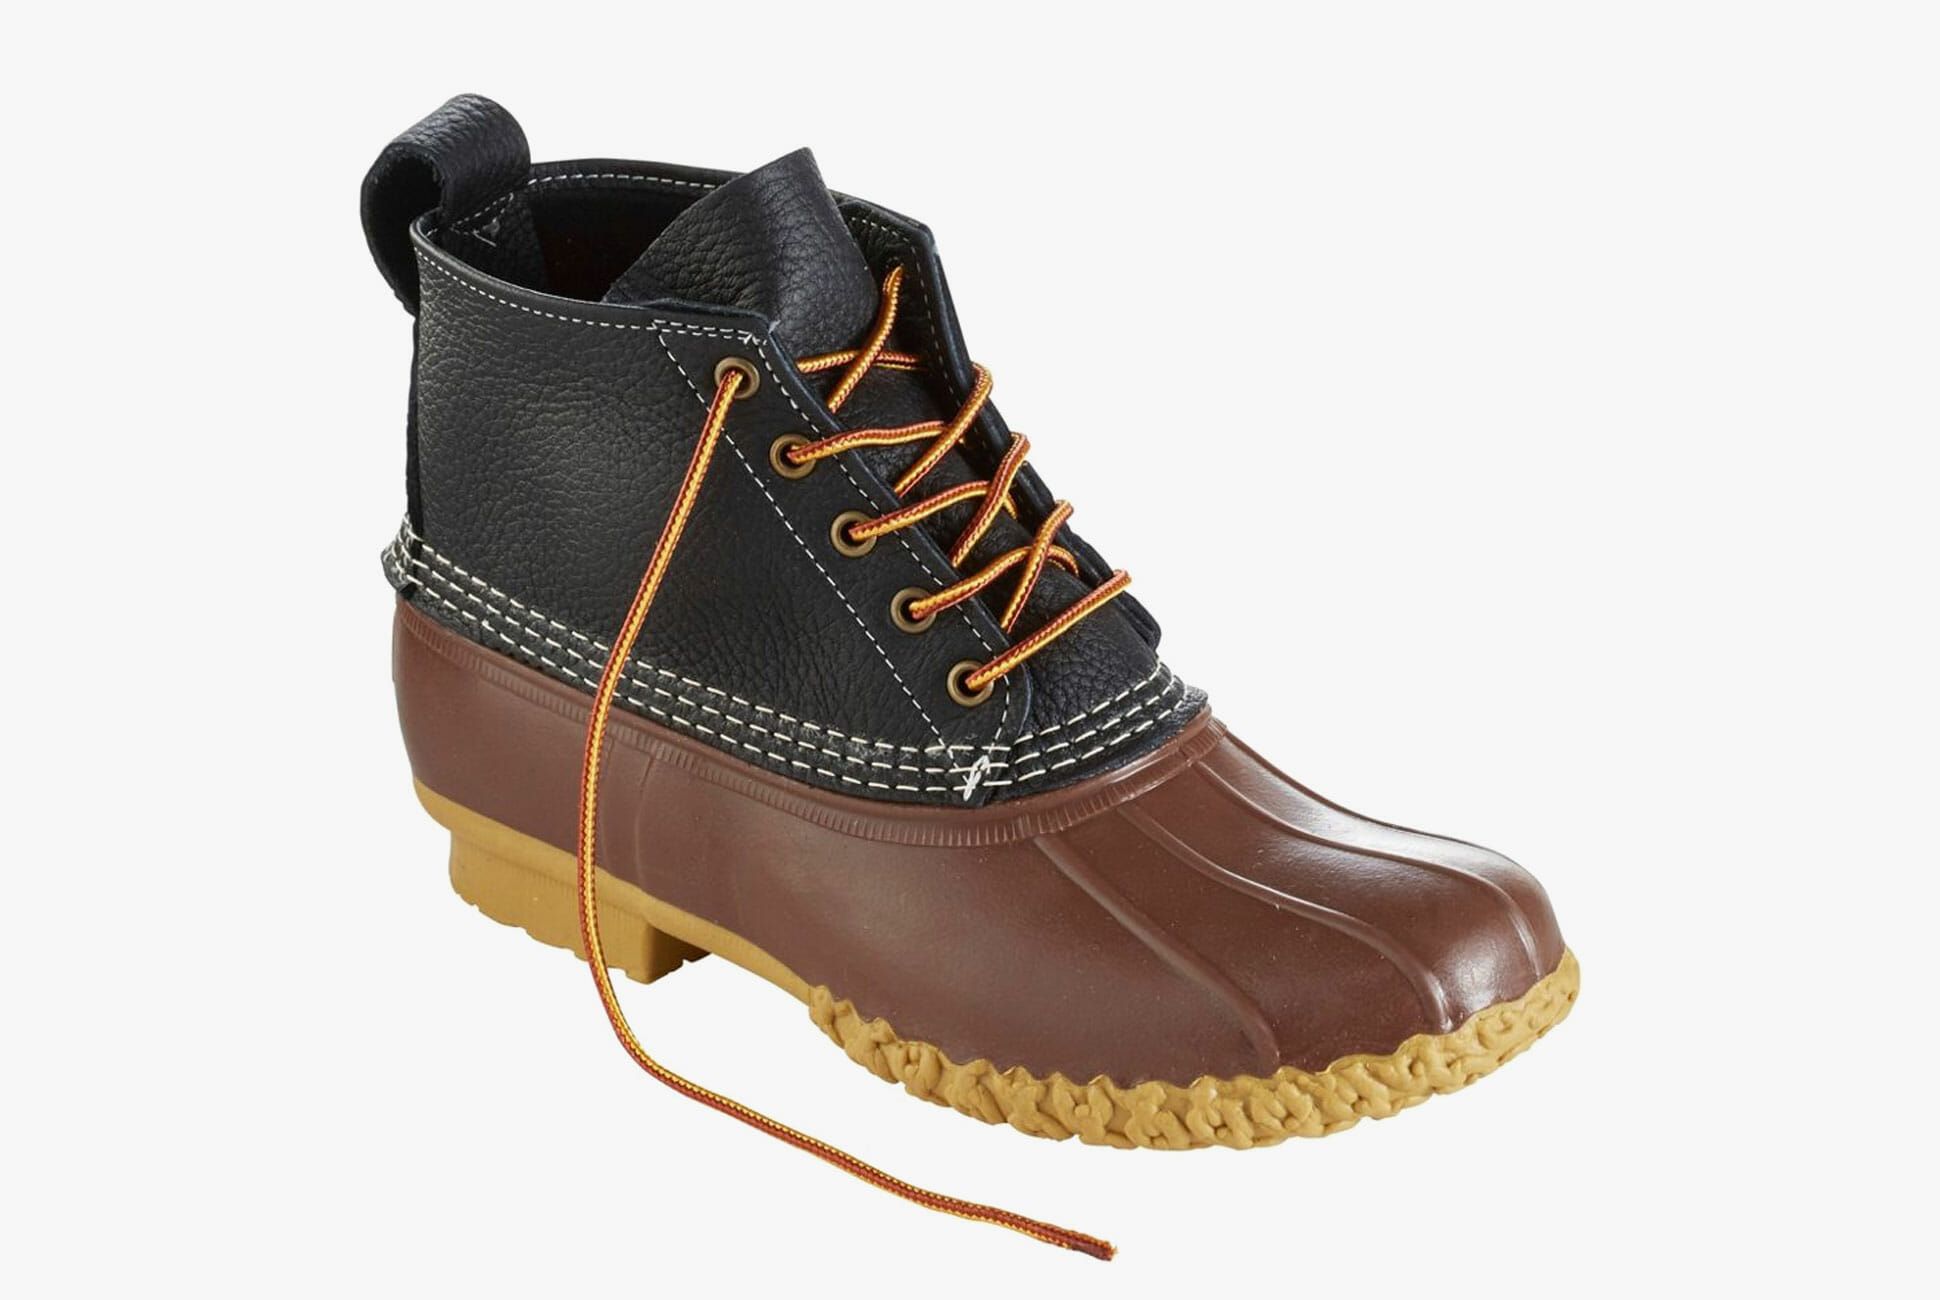 L.L. Bean's Awesome Duck Boots Are on 